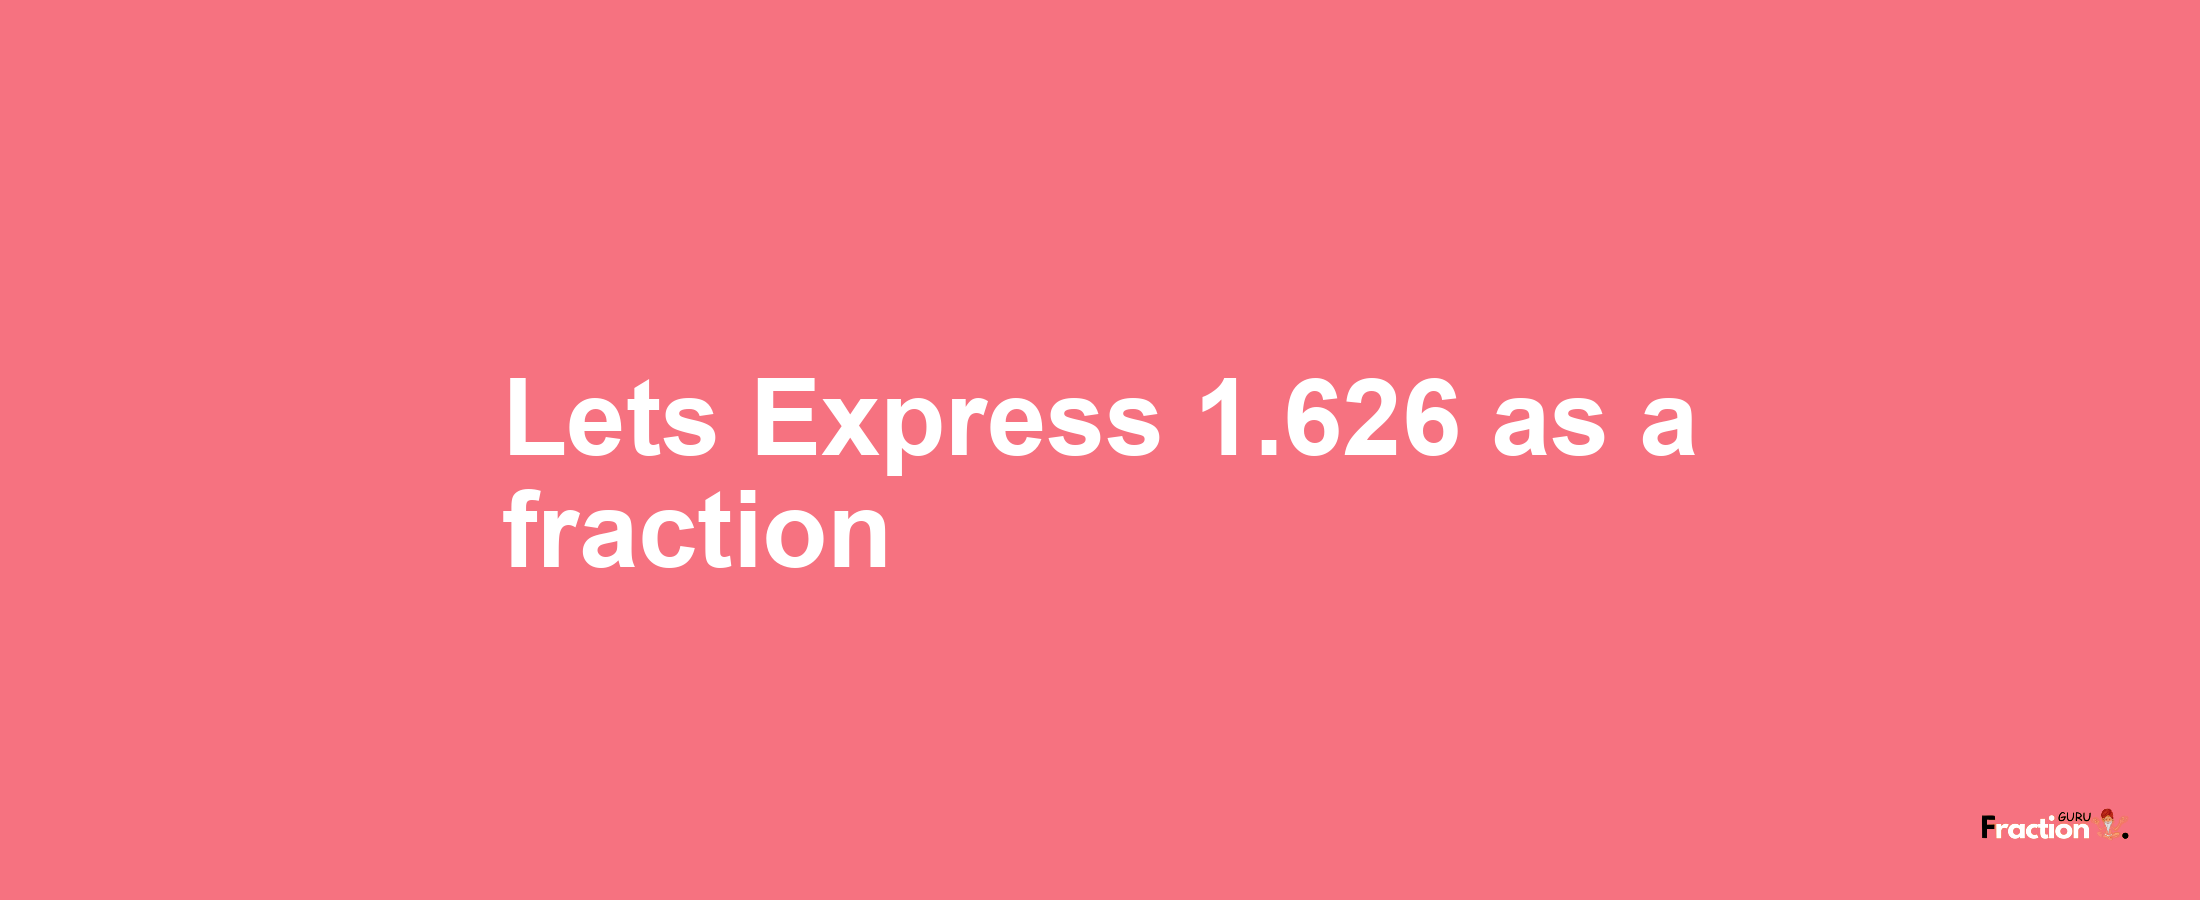 Lets Express 1.626 as afraction